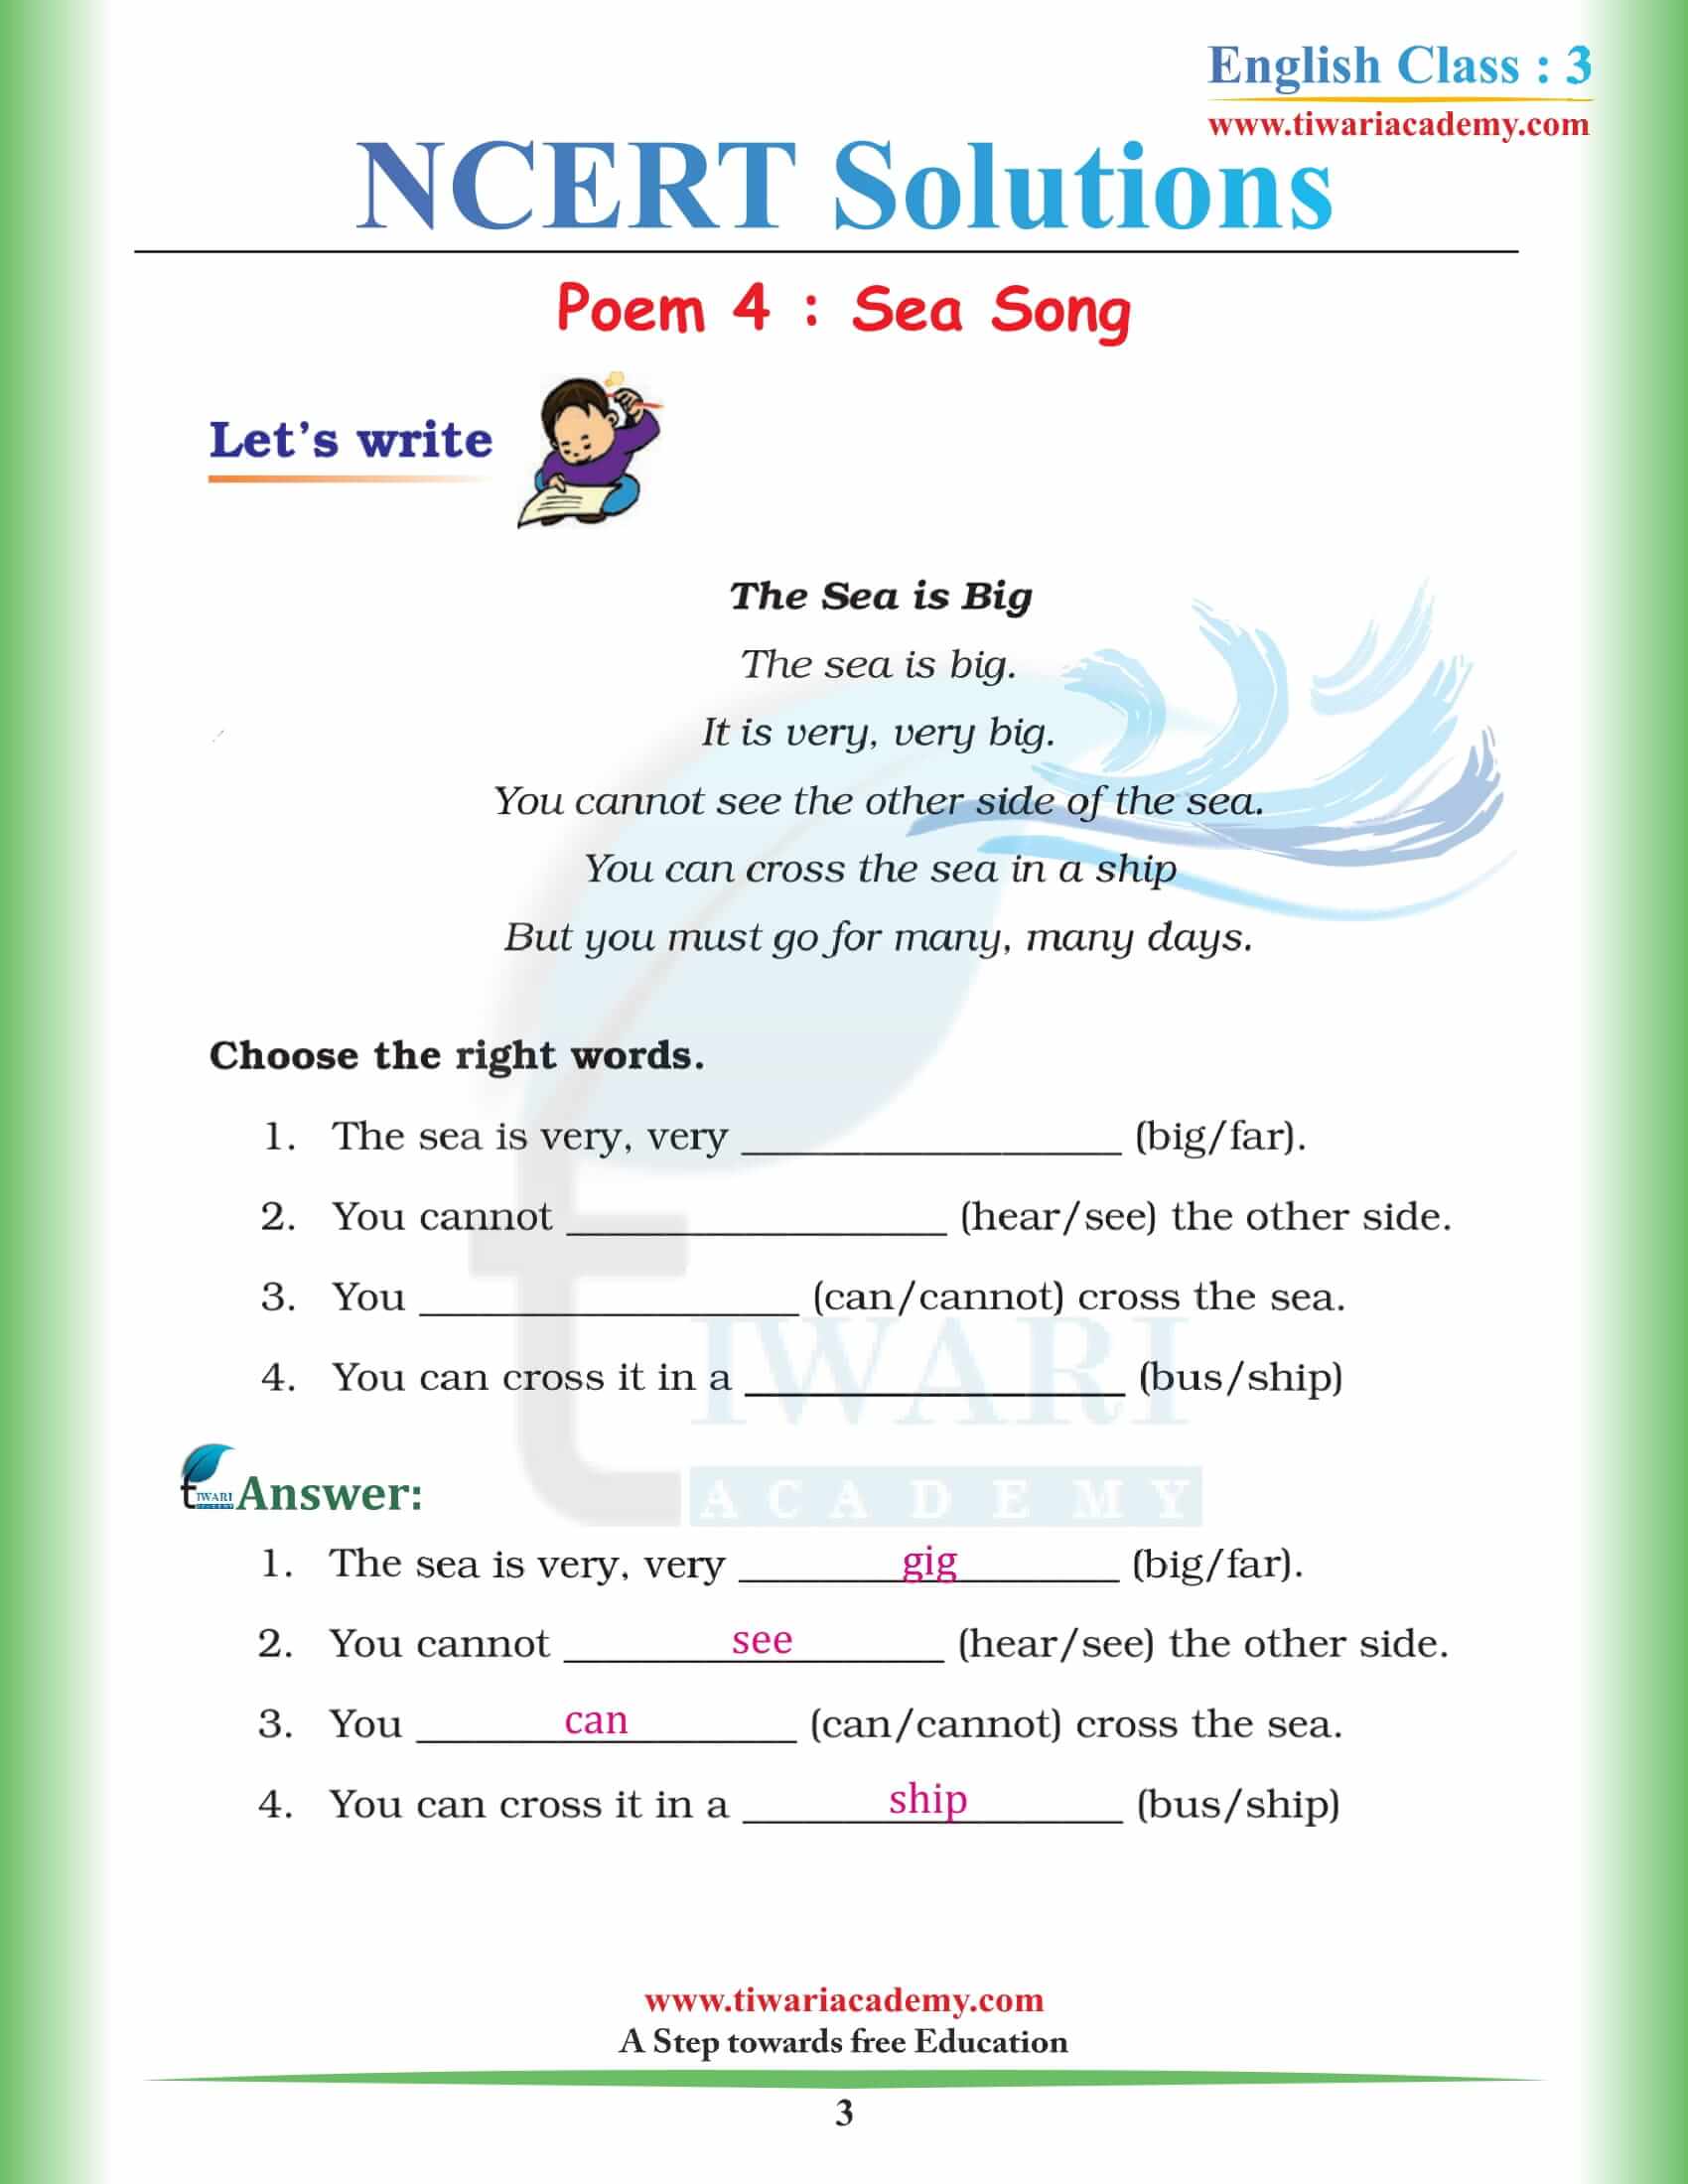 NCERT Solutions for Class 3 English Unit 4